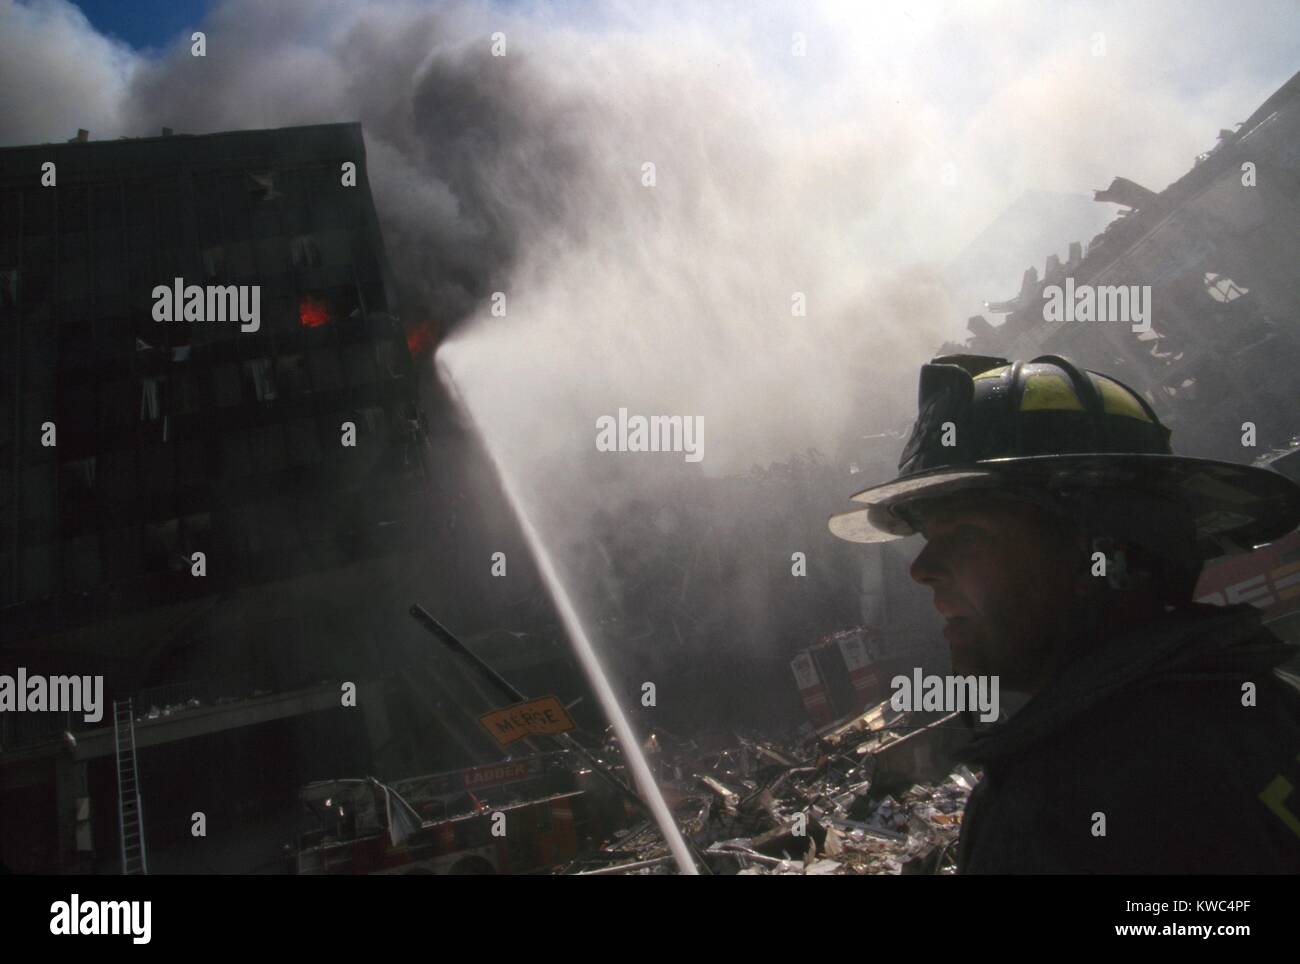 Fire fighter at World Trade Center site following September 11th terrorist attack. In the center background is the burning pile of the collapsed WTC 1 (North Tower). New York City, Sept. 11, 2001. Burning at left is the still standing WTC 6. At far right is the destroyed North pedestrian bridge over West Side Highway (West St.). (BSLOC 2015 2 55) Stock Photo